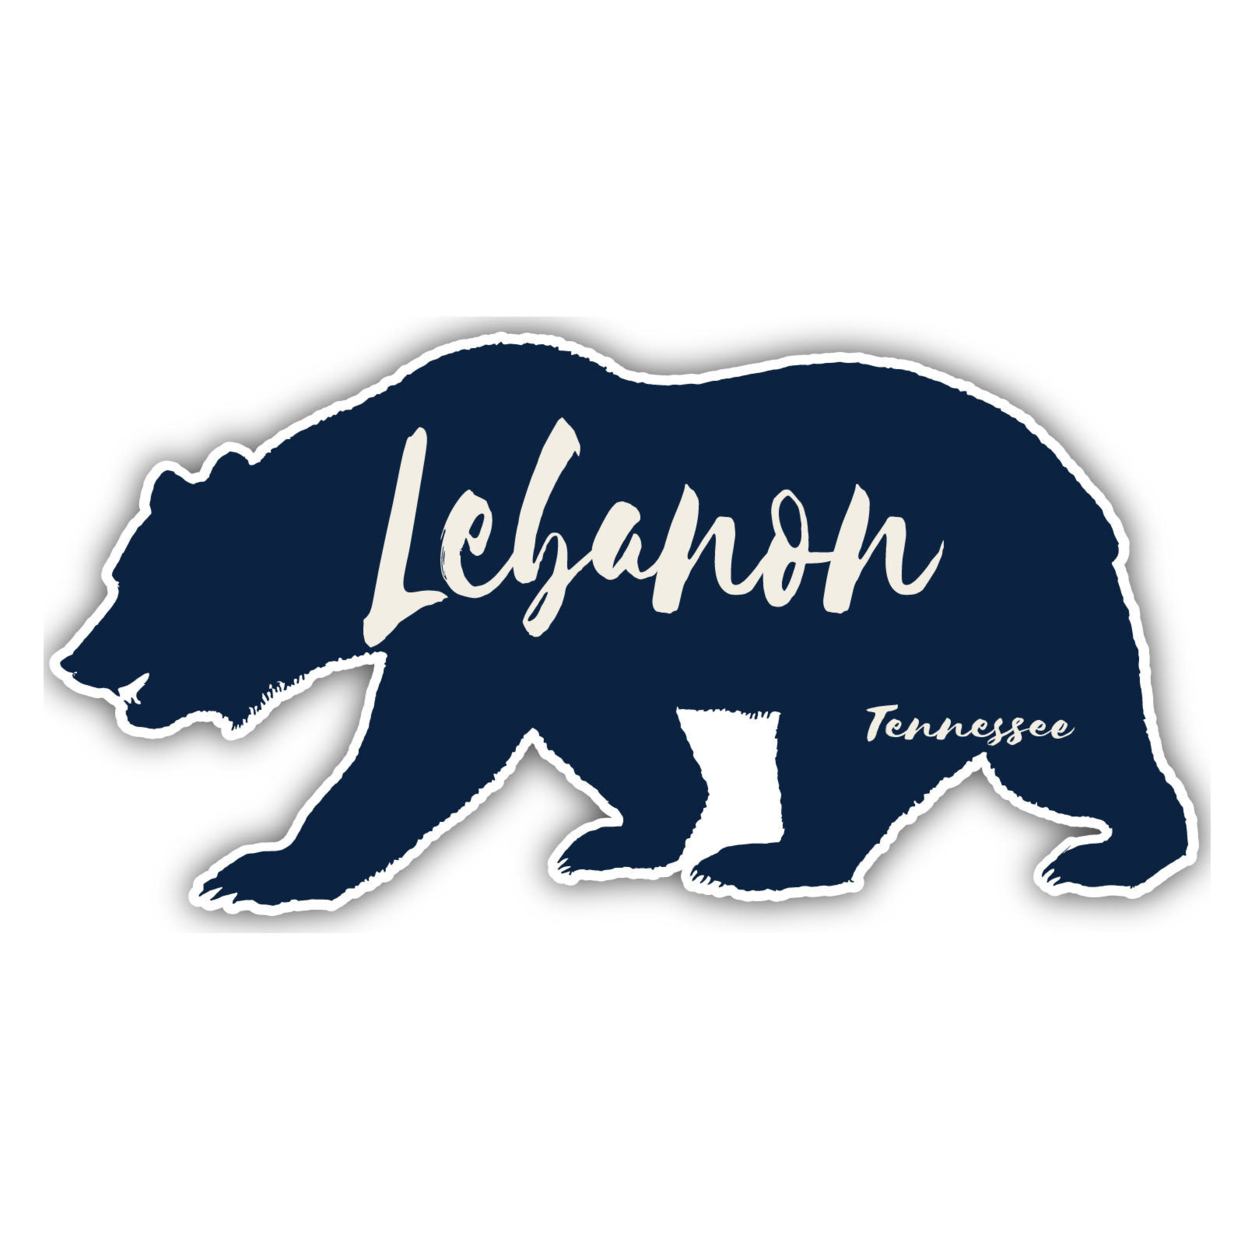 Lebanon Tennessee Souvenir Decorative Stickers (Choose Theme And Size) - 4-Inch, Bear